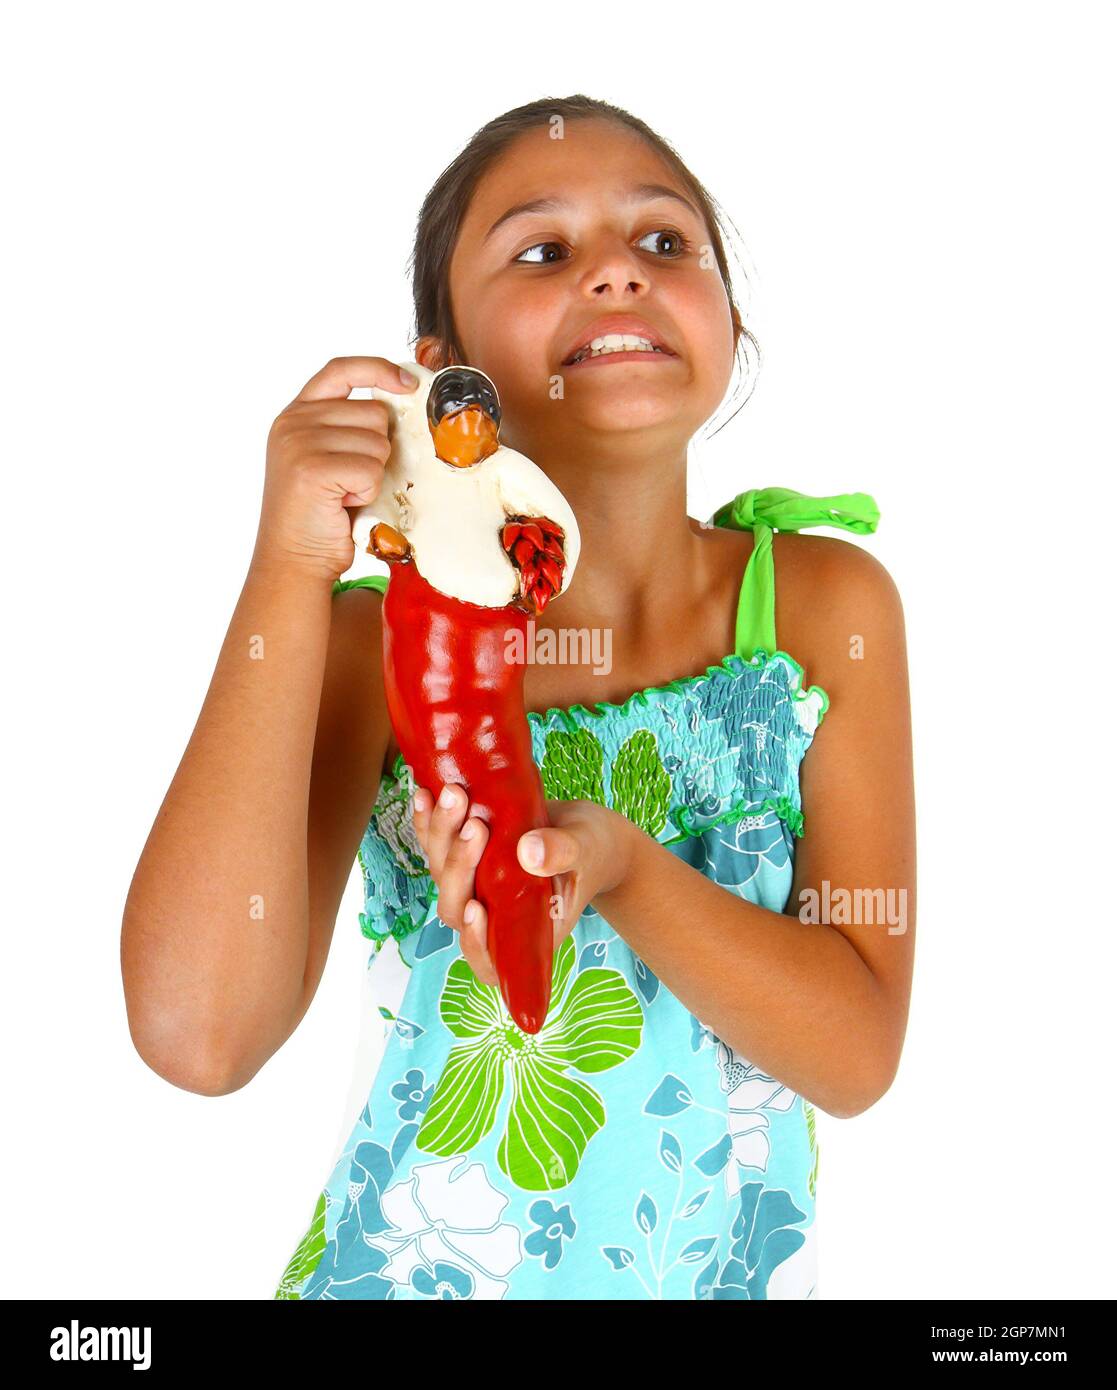 Little girl with neapolitan superstitious object on white background Stock Photo